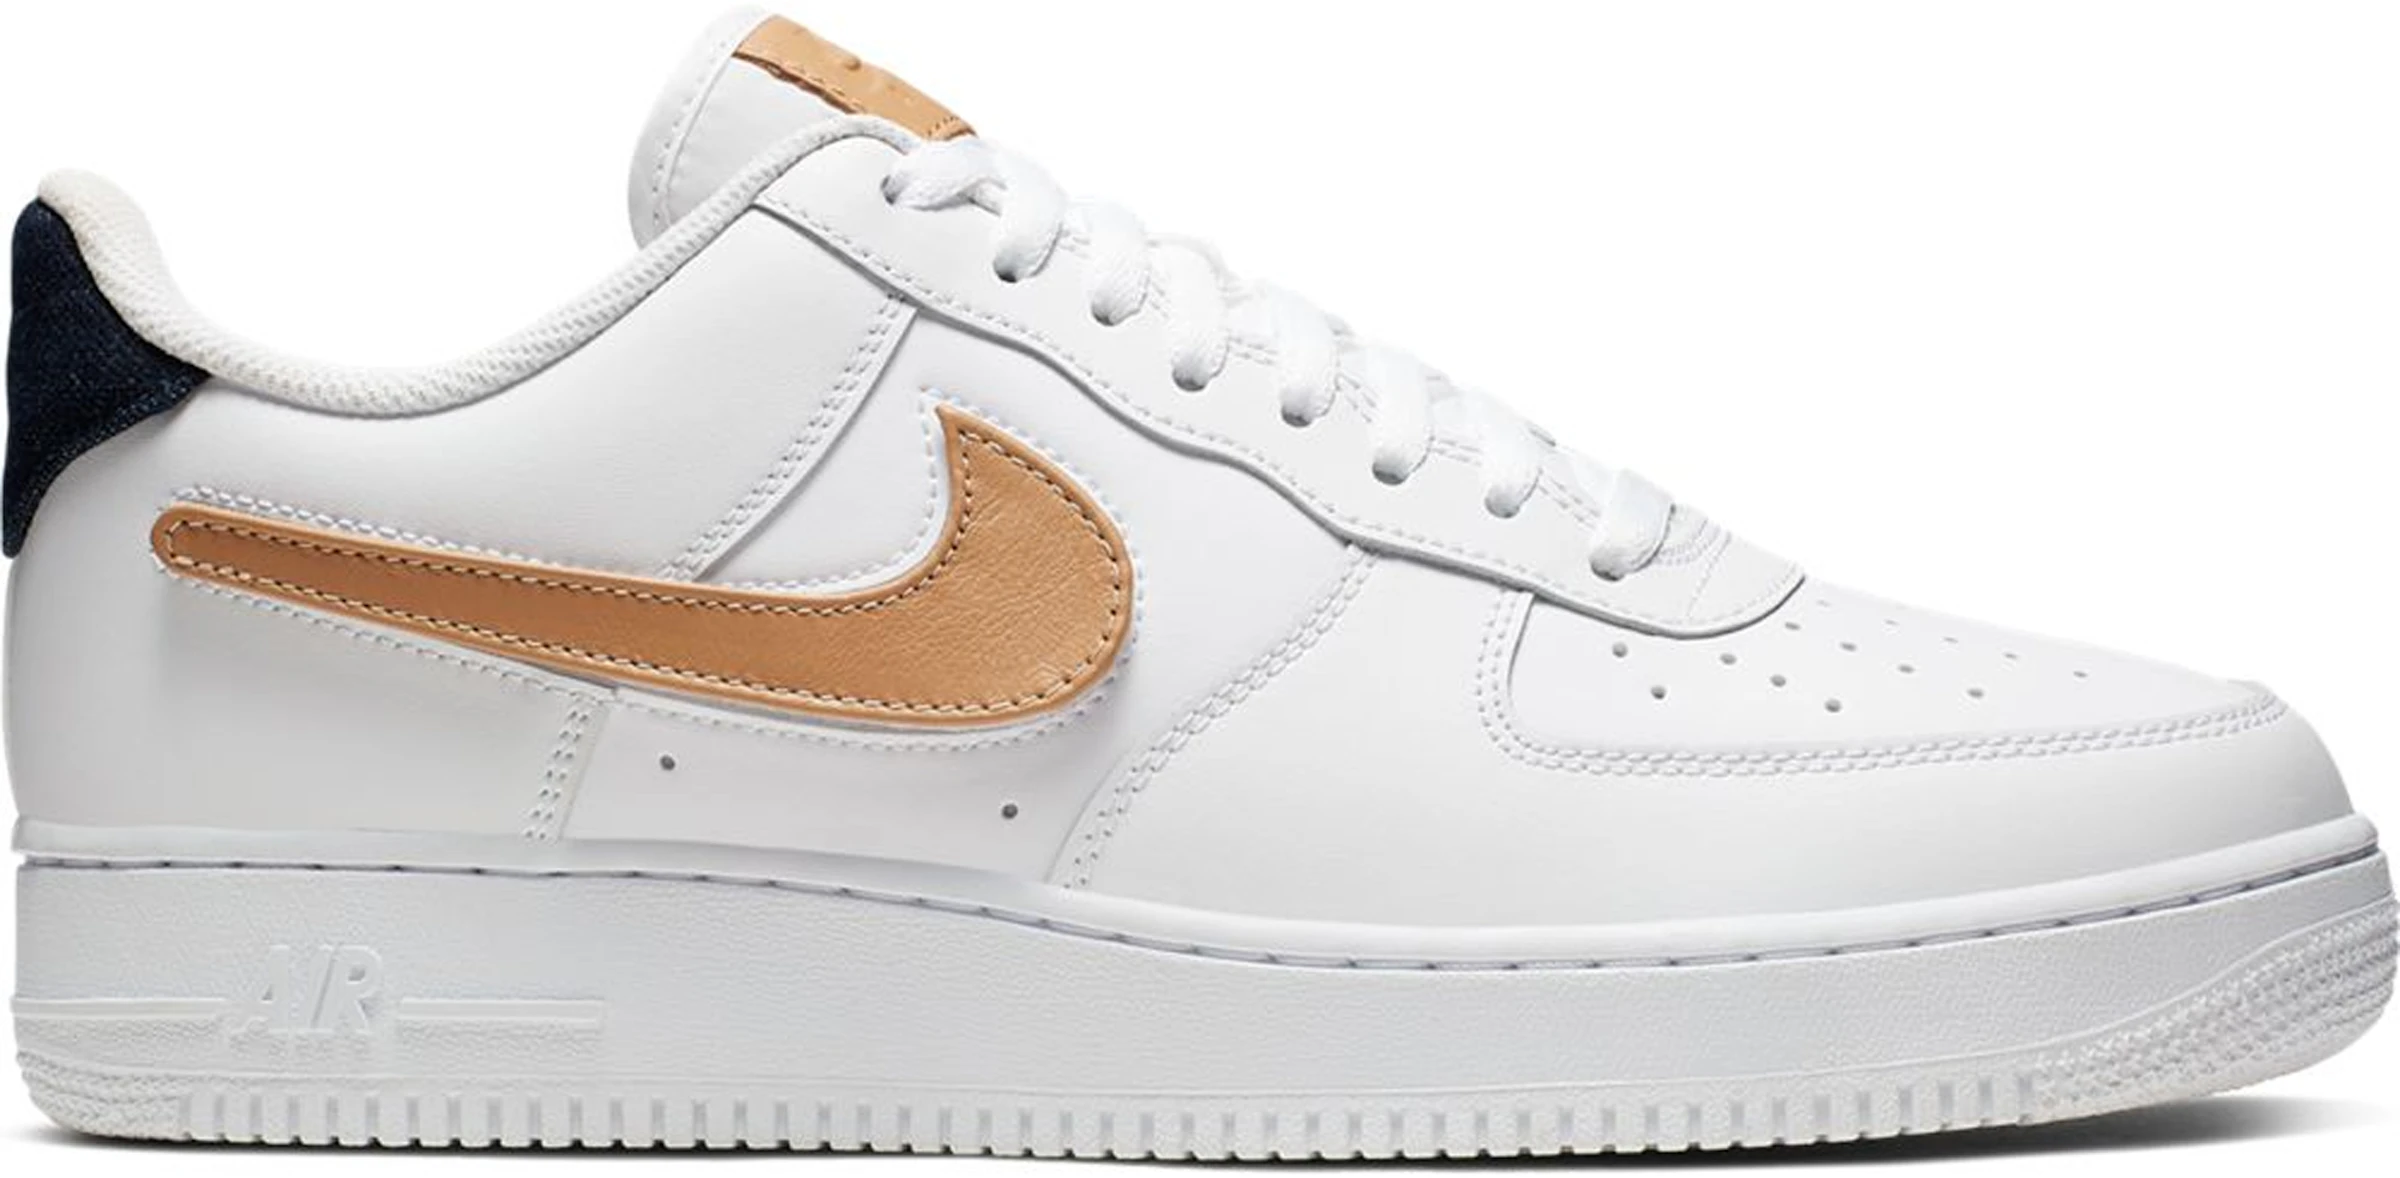 Nike Air 1 Low Removable Swoosh Pack White Vachetta Tan - CT2253-100 -